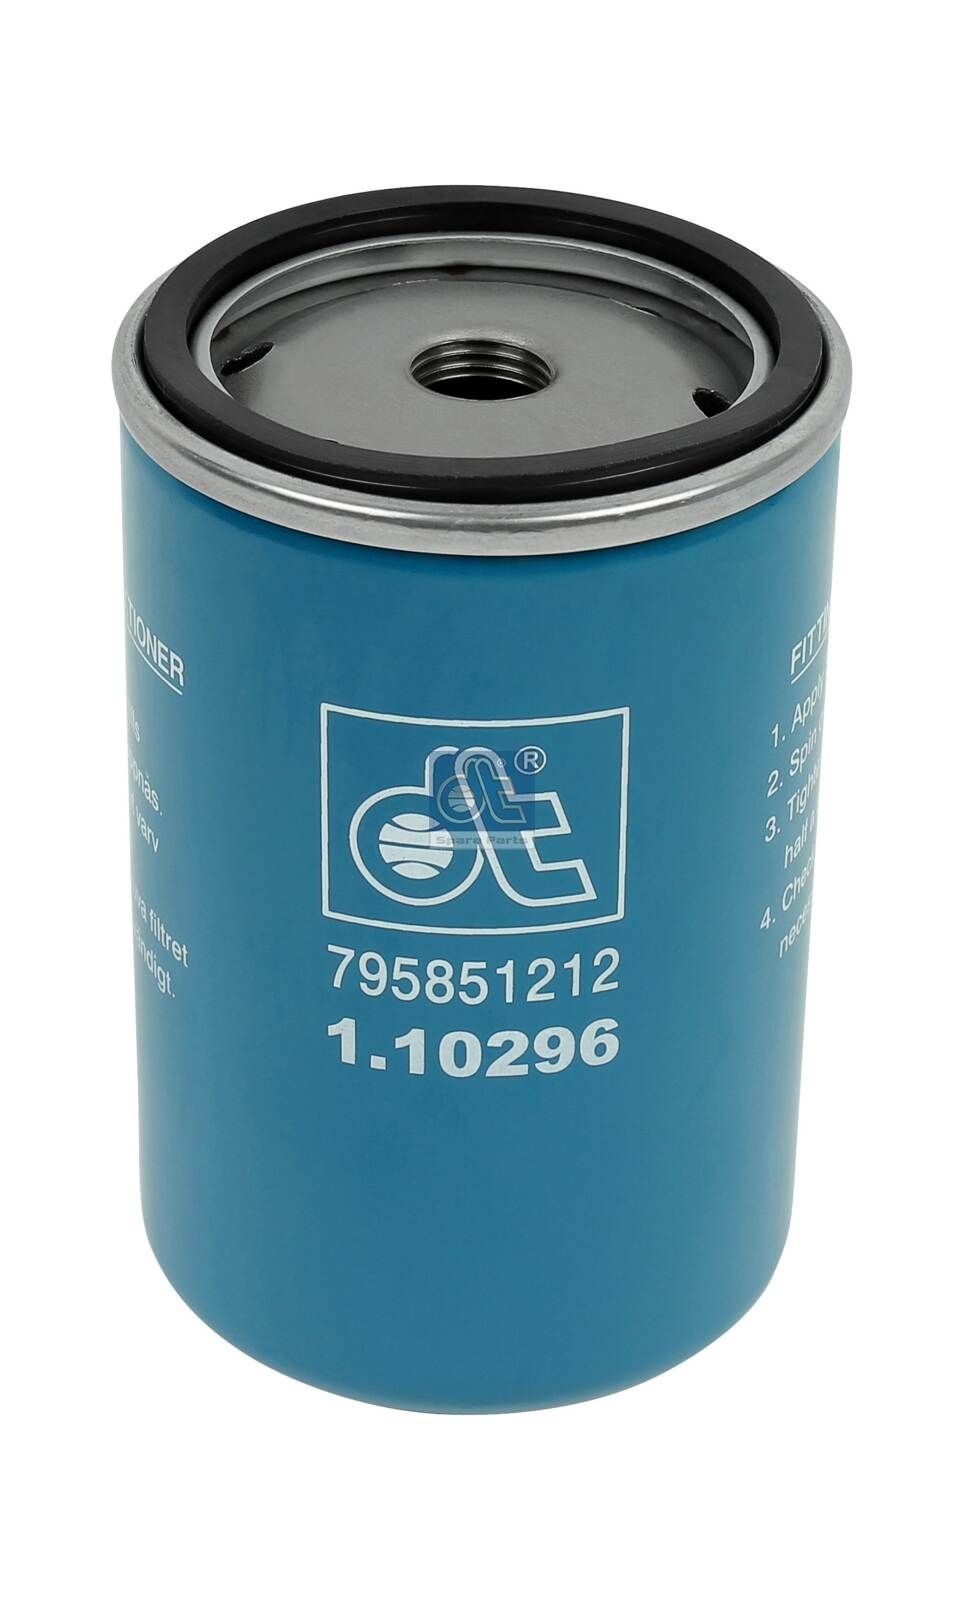 WK 723/1 DT Spare Parts 1.10296 Fuel filter 8000 250